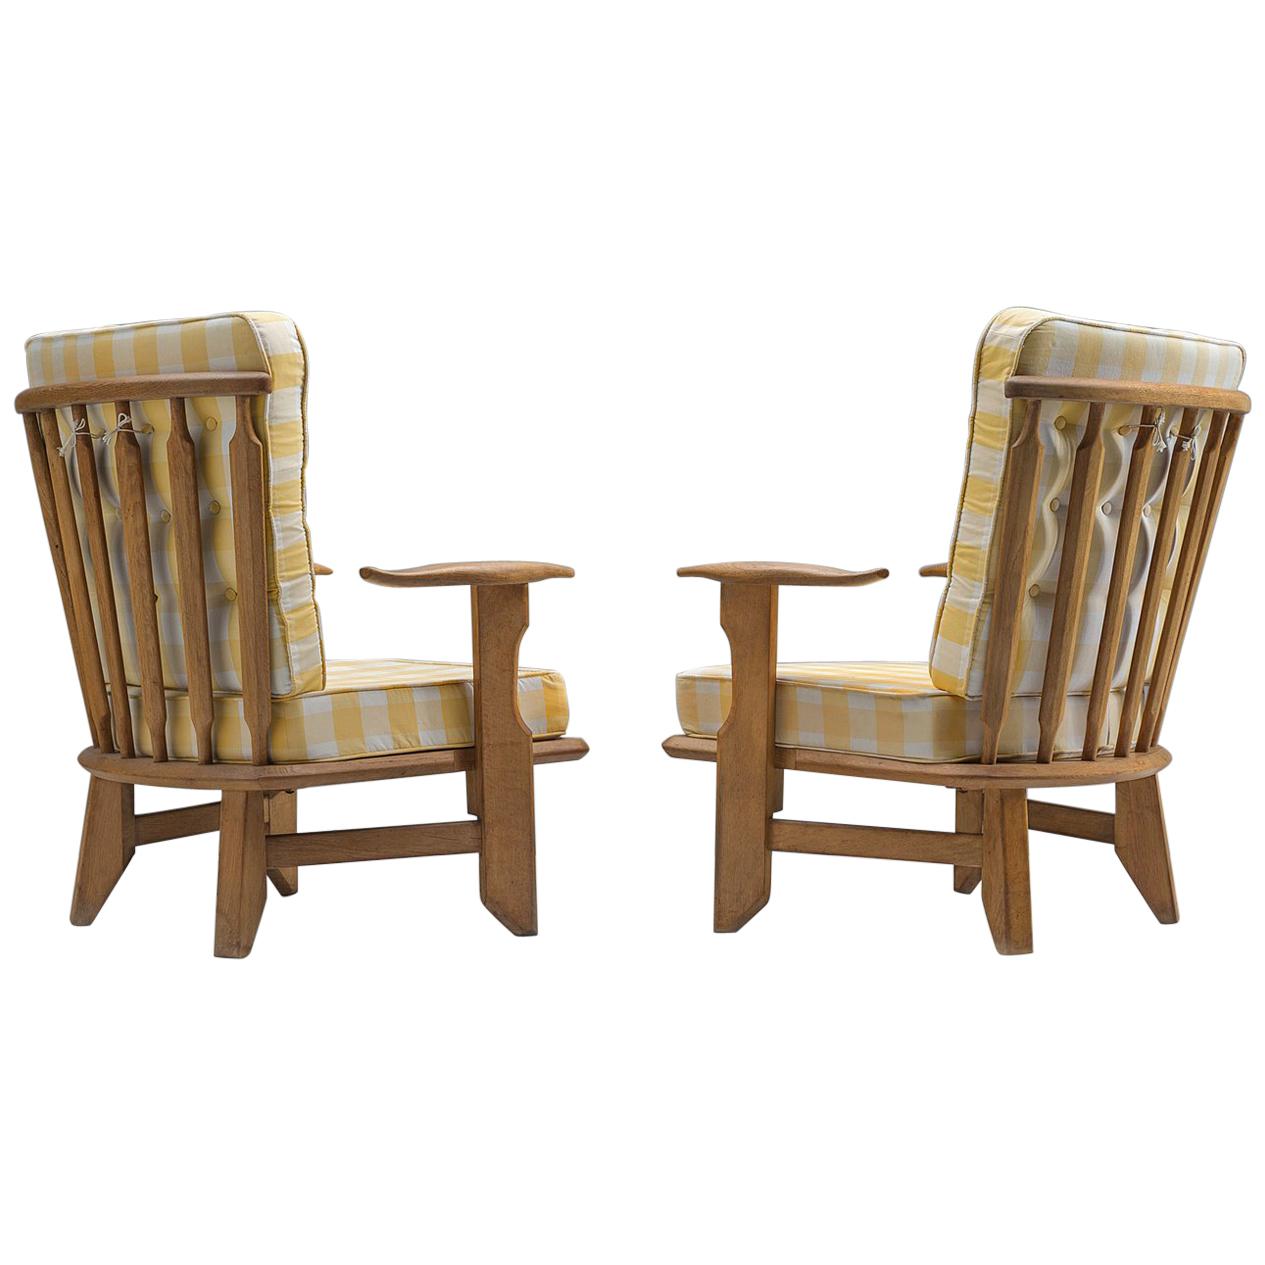 Guillerme & Chambron Solid Oak Lounge Chairs with Checked Fabric